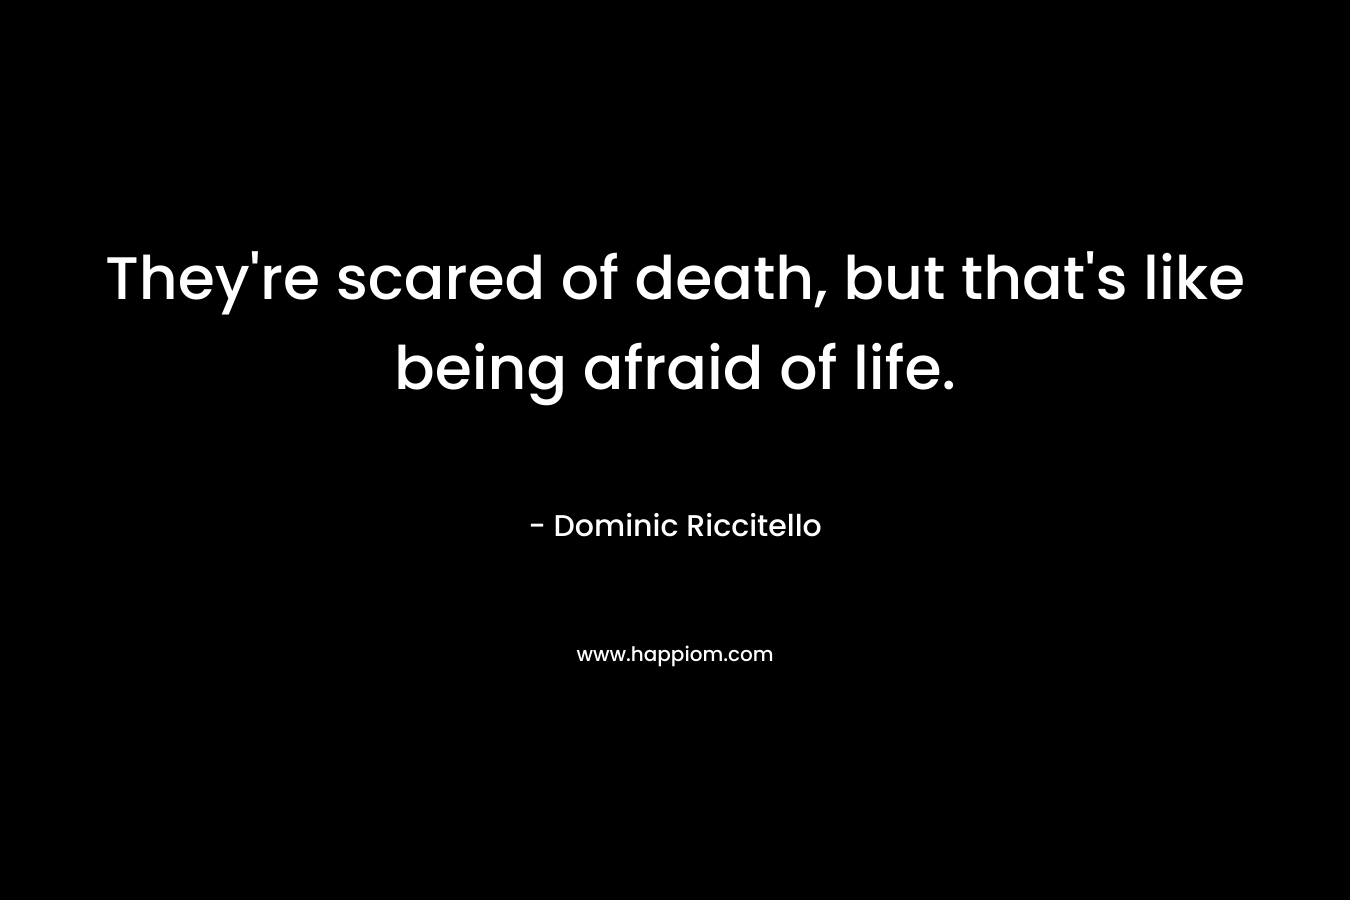 They're scared of death, but that's like being afraid of life.